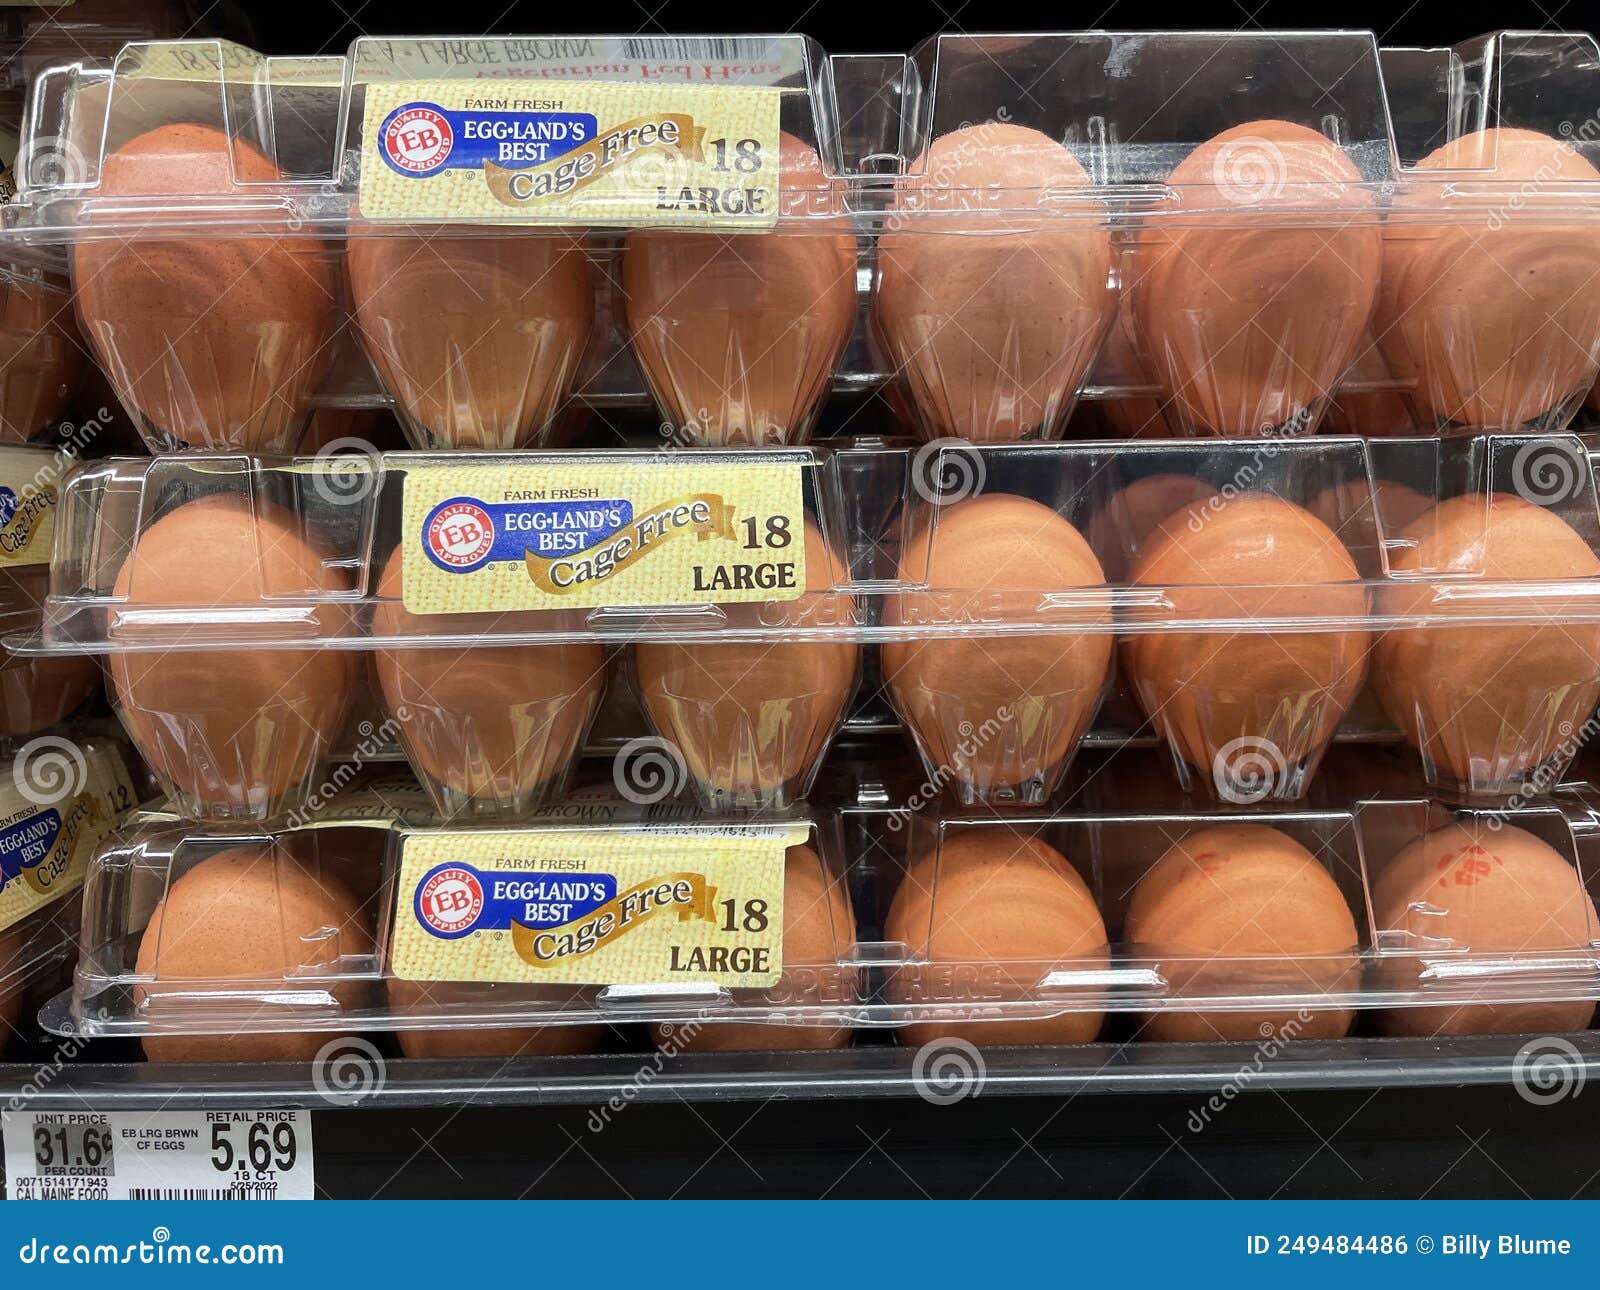 retail-store-eggs-egglands-best-cage-free-and-price-editorial-photo